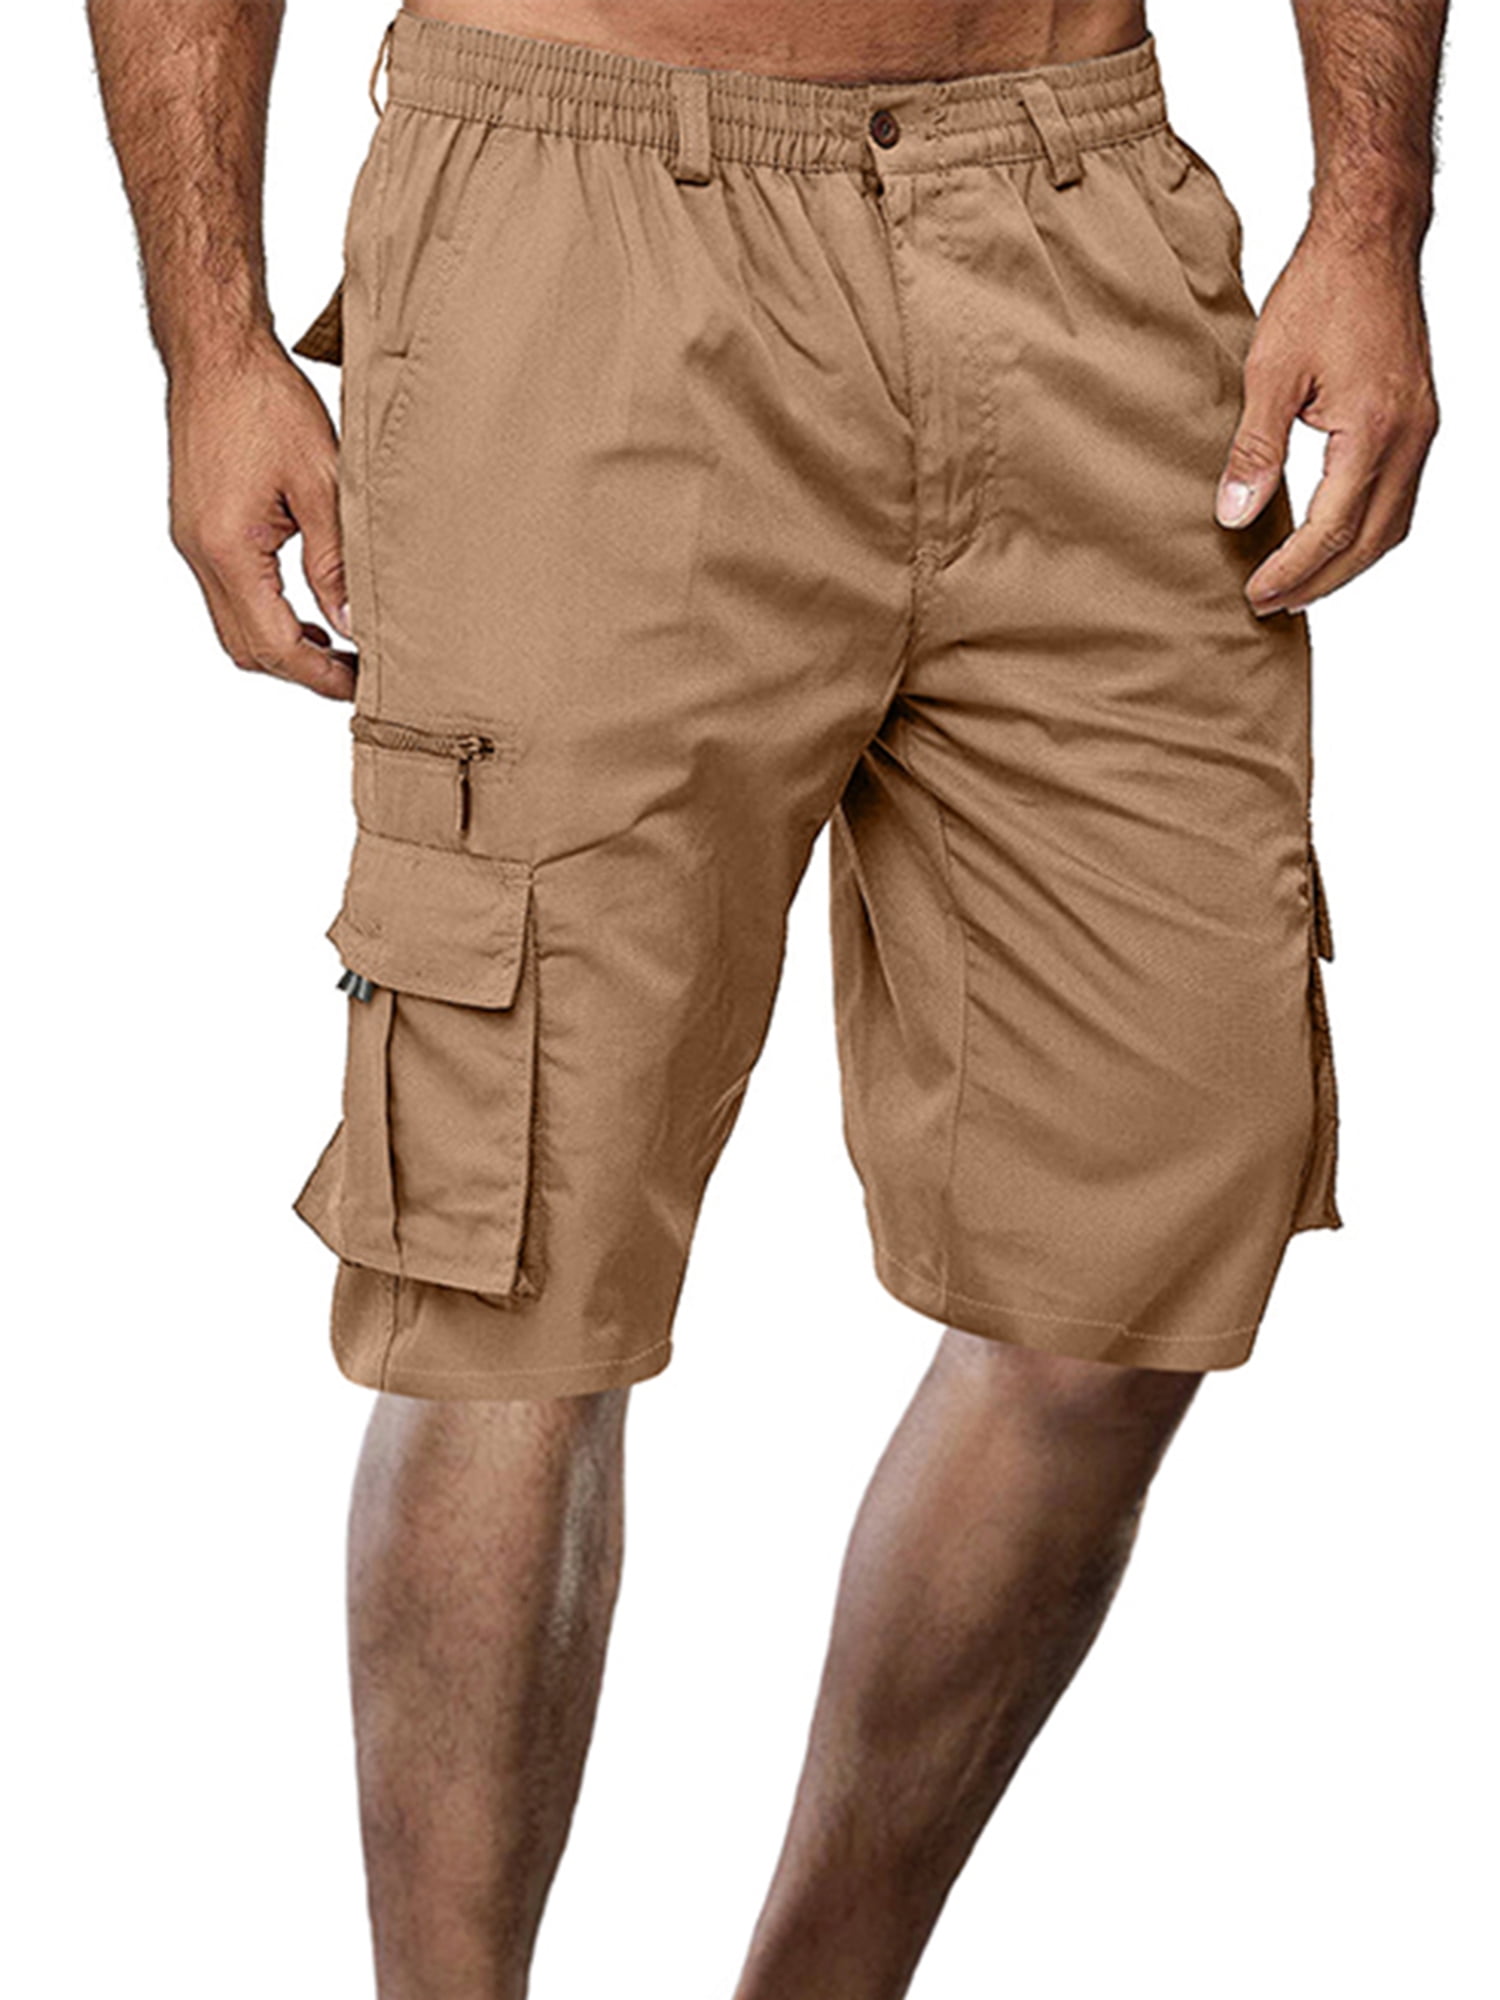 Boys Mens Elastic Waist Cargo Shorts,Youth Casual Lightweight Outdoor Quick Dry Hiking Travel 